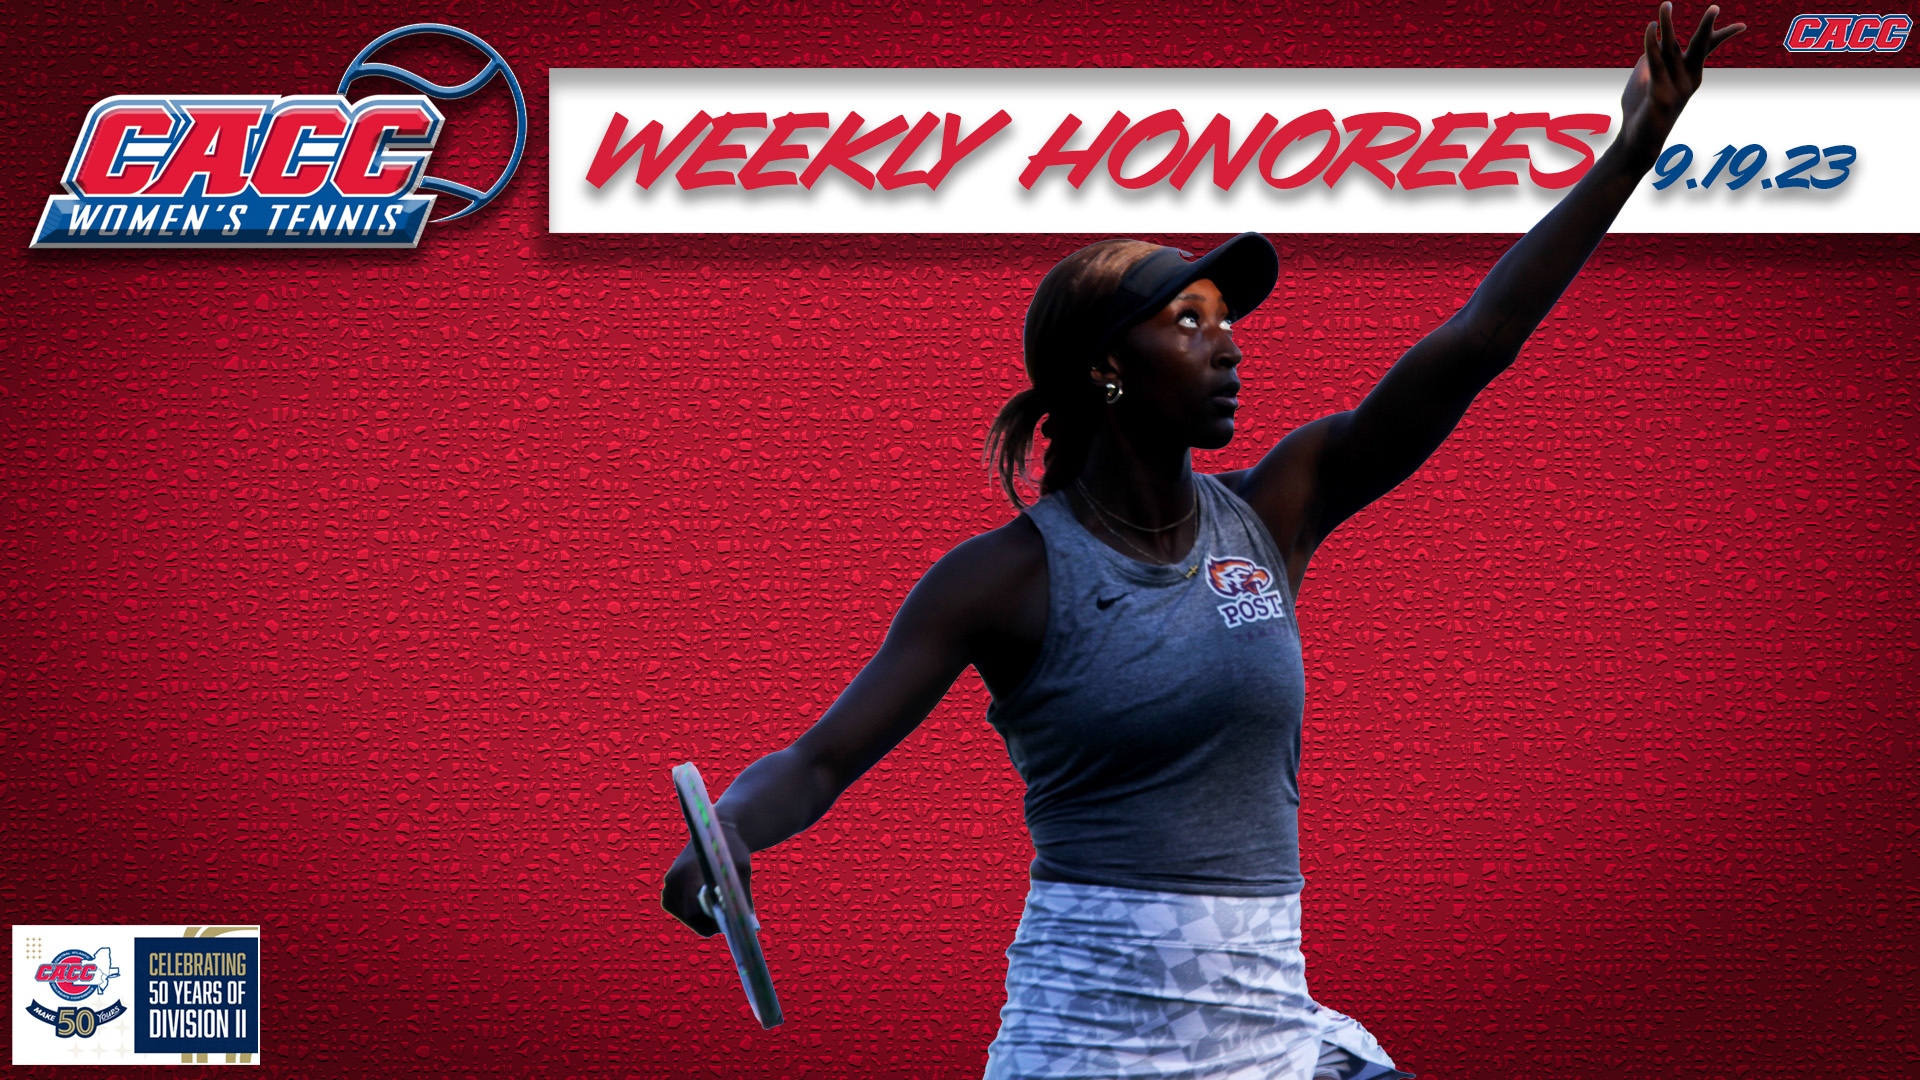 CACC Women's Tennis Weekly Honorees (9-19-23)